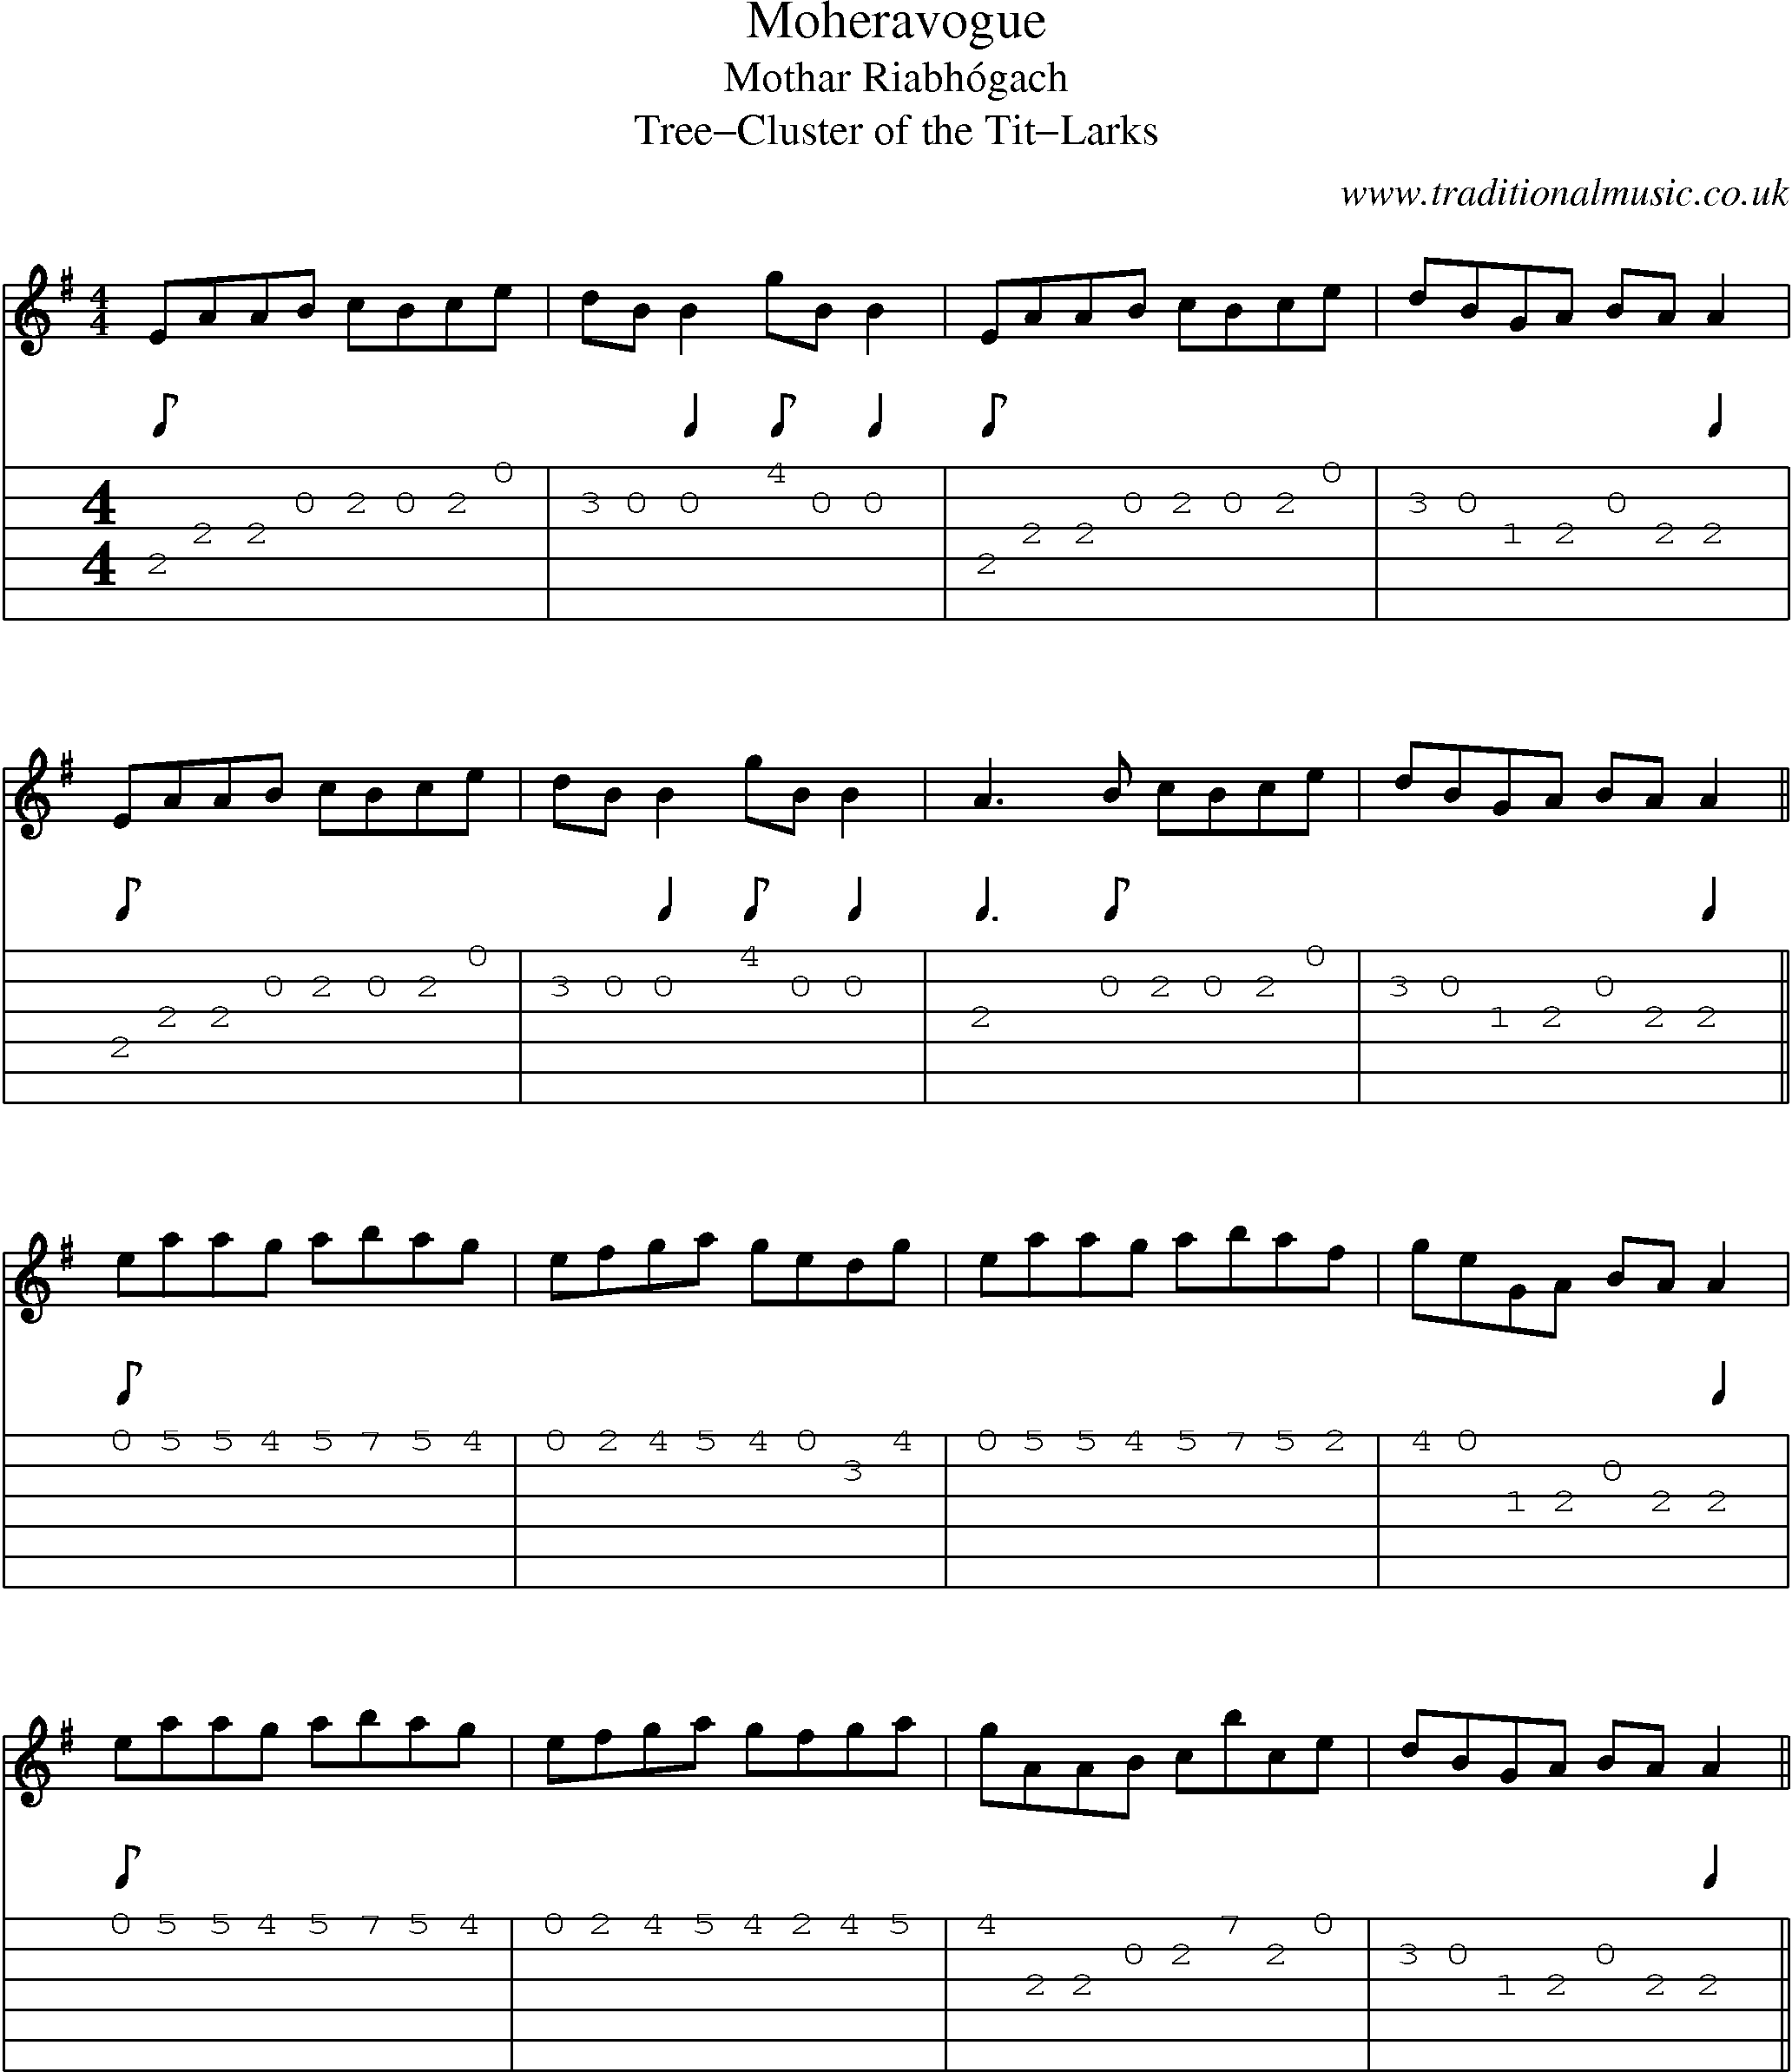 Music Score and Guitar Tabs for Moheravogue